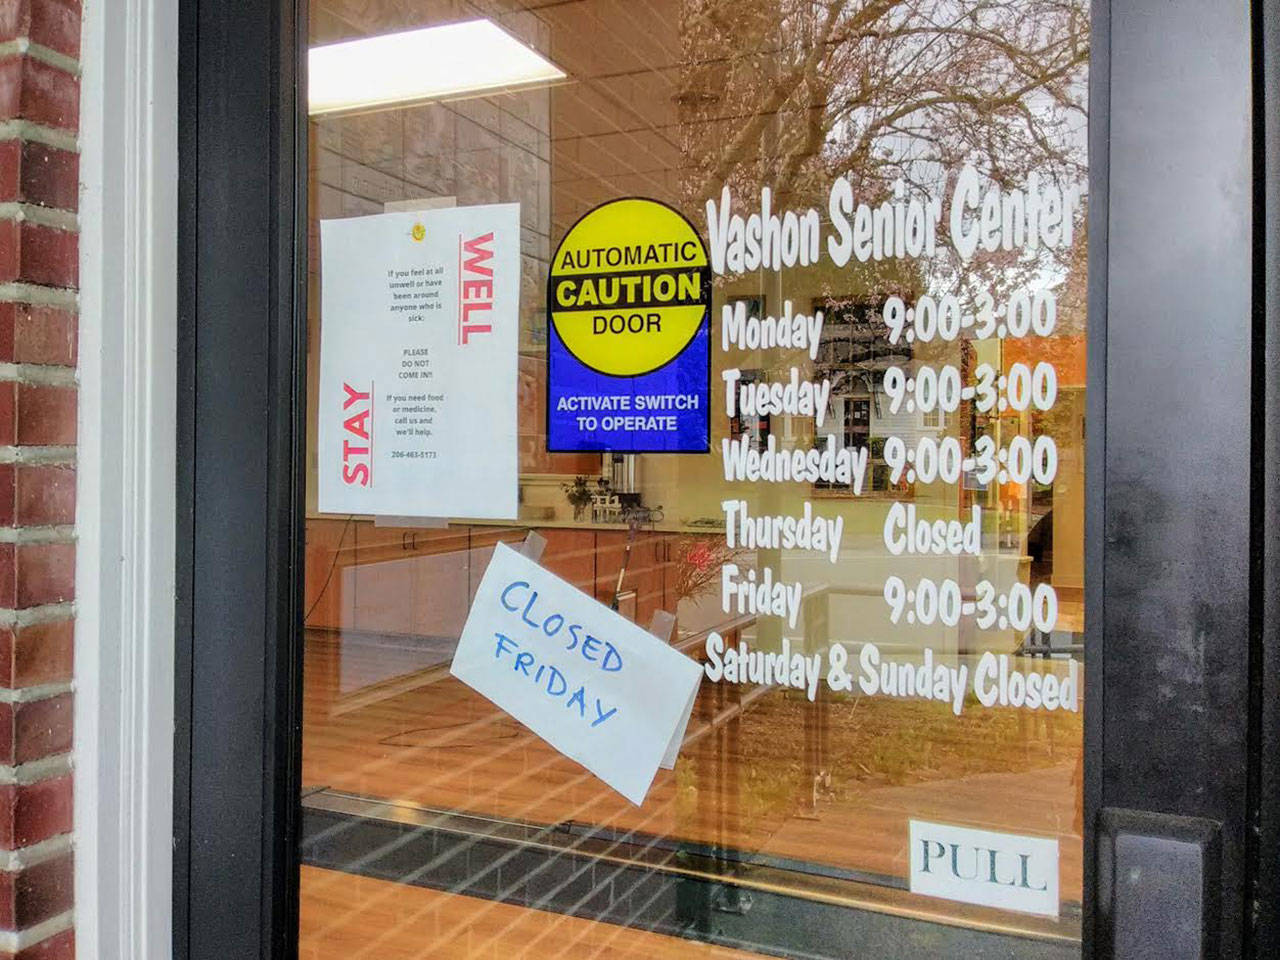 A note on the door of the Vashon Senior Center says the facility will be closed on Friday, March 6, but the executive director announced on Thursday it is in fact closed for “the foreseeable future” due to concerns of COVID-19. (Paul Rowley/Staff Photo)